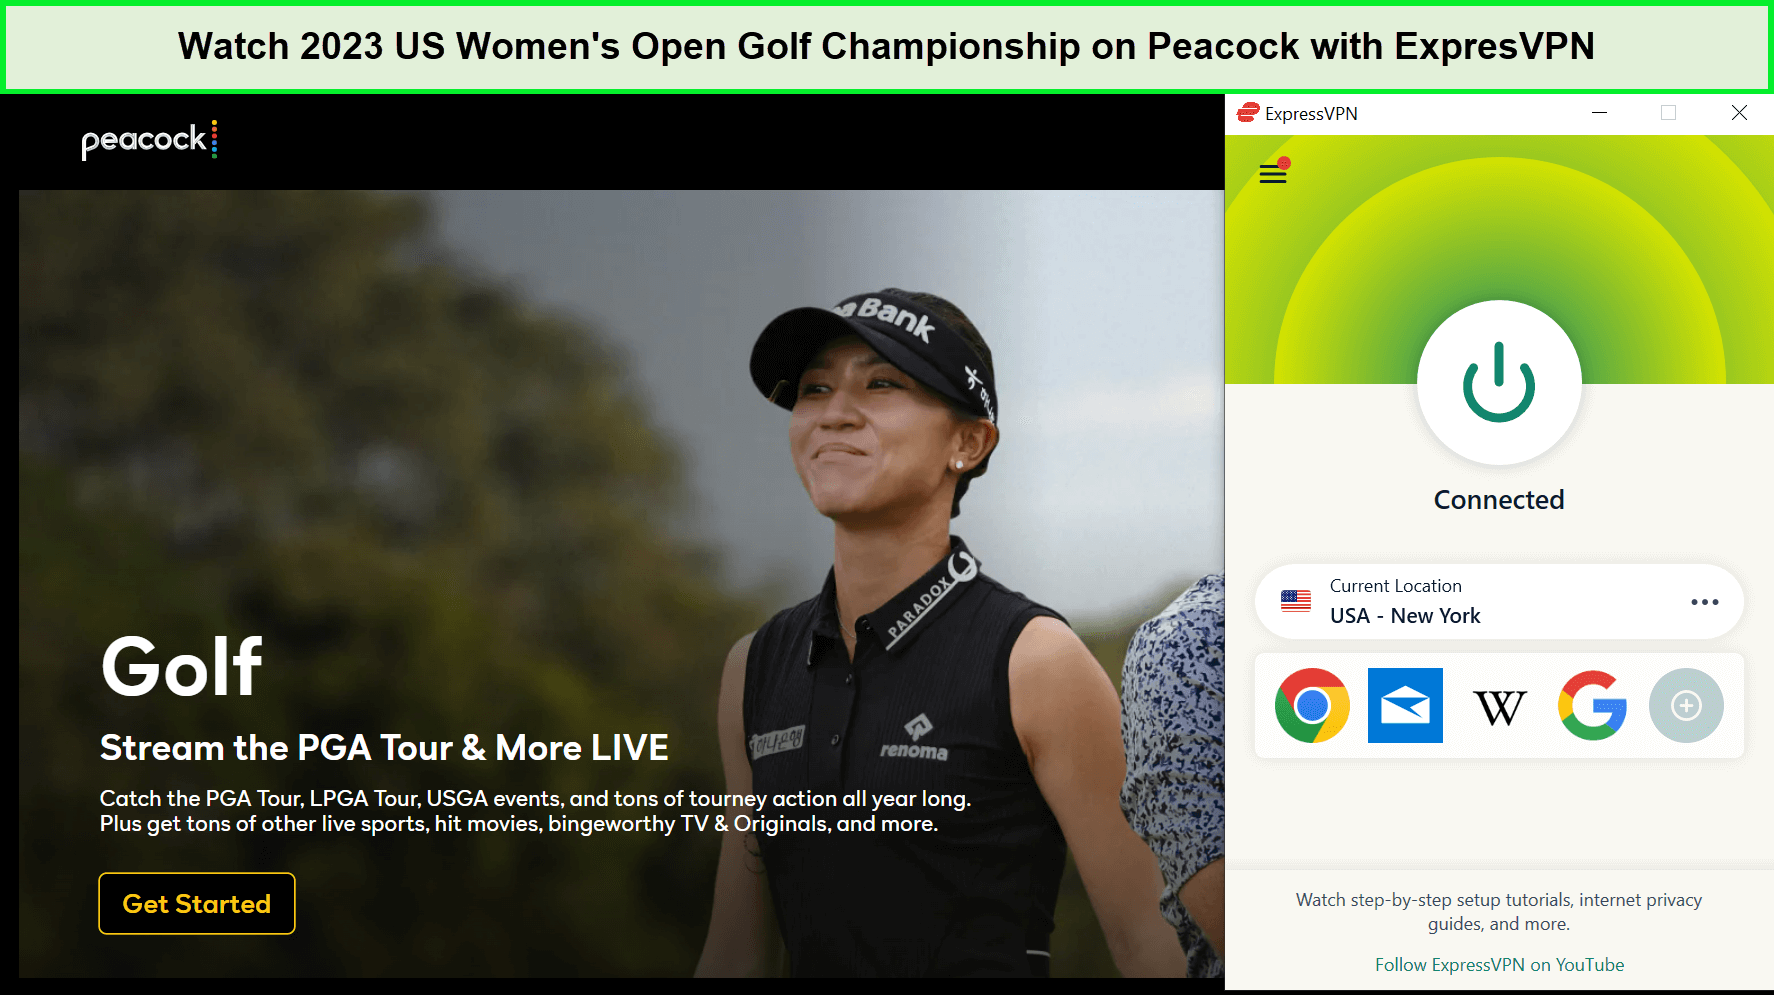 Watch-2023-US-Womens-Open-Golf-Championship-outside-USA-on-Peacock-with-ExpresVPN